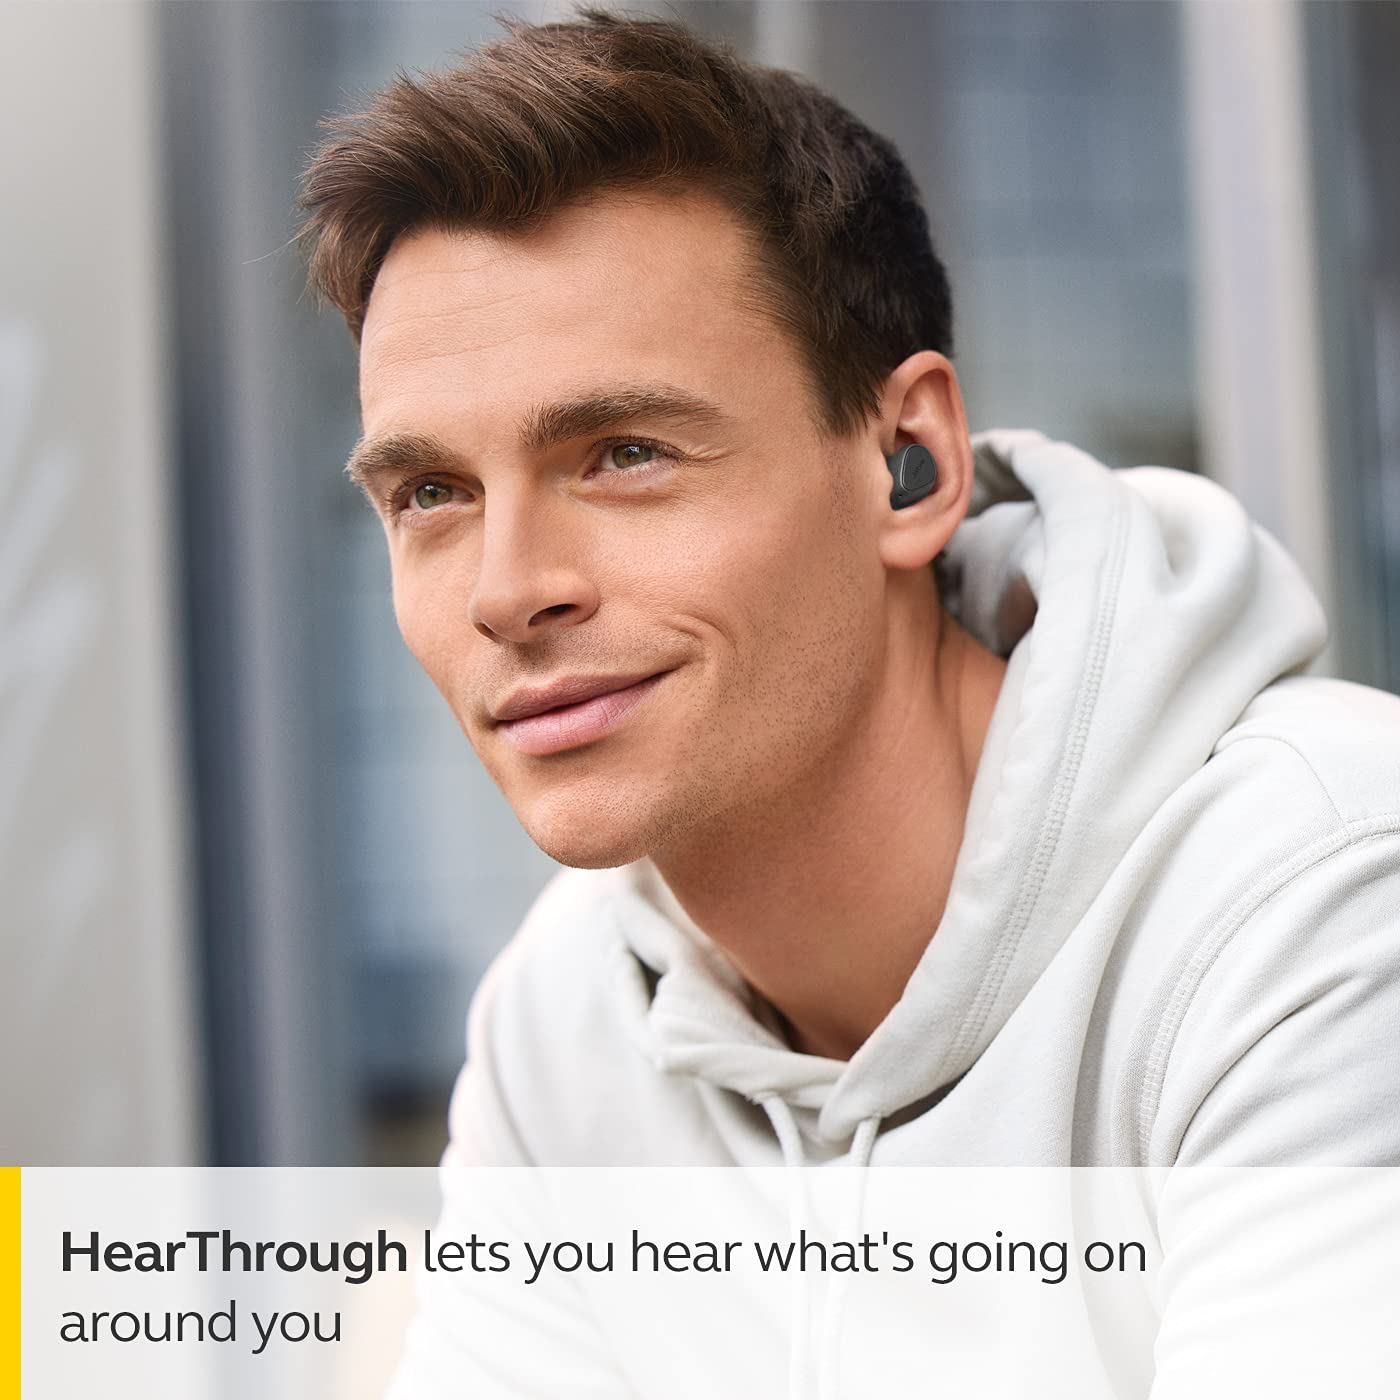  Jabra Elite 3 in Ear Wireless Bluetooth Earbuds – Noise  Isolating True Wireless Buds with 4 Built-in Microphones for Clear Calls,  Rich Bass, Customizable Sound, and Mono Mode - Light Beige : Electronics